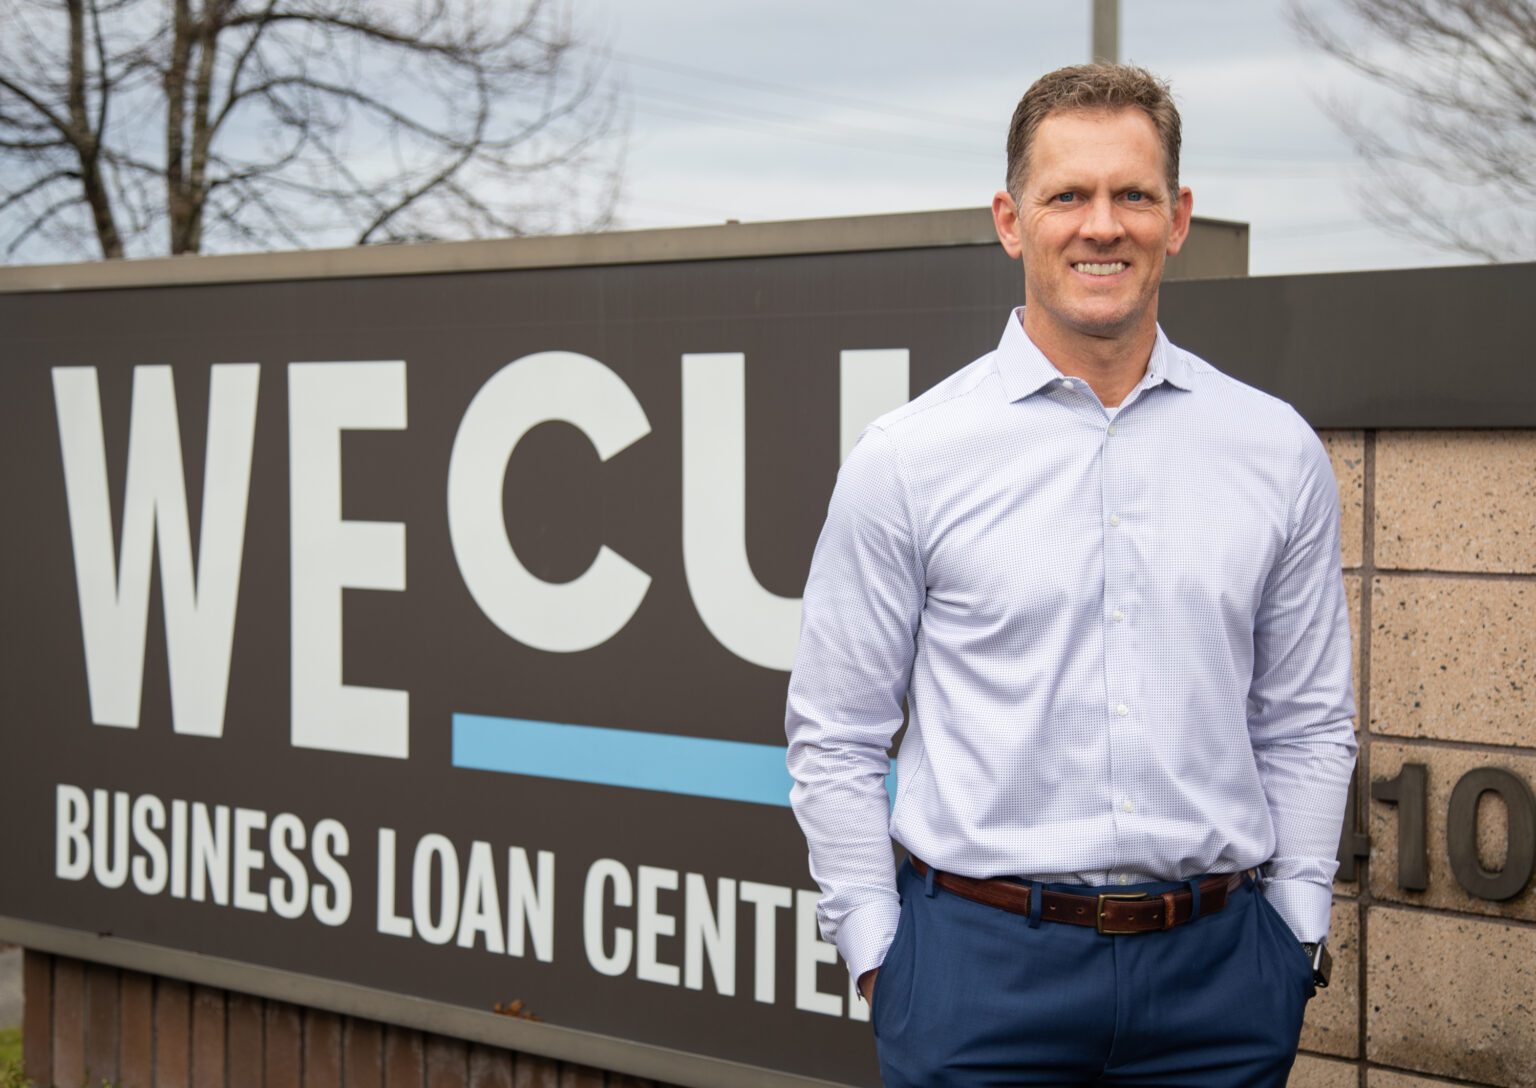 Kent Bouma is the vice president of business banking at WECU. This holiday season